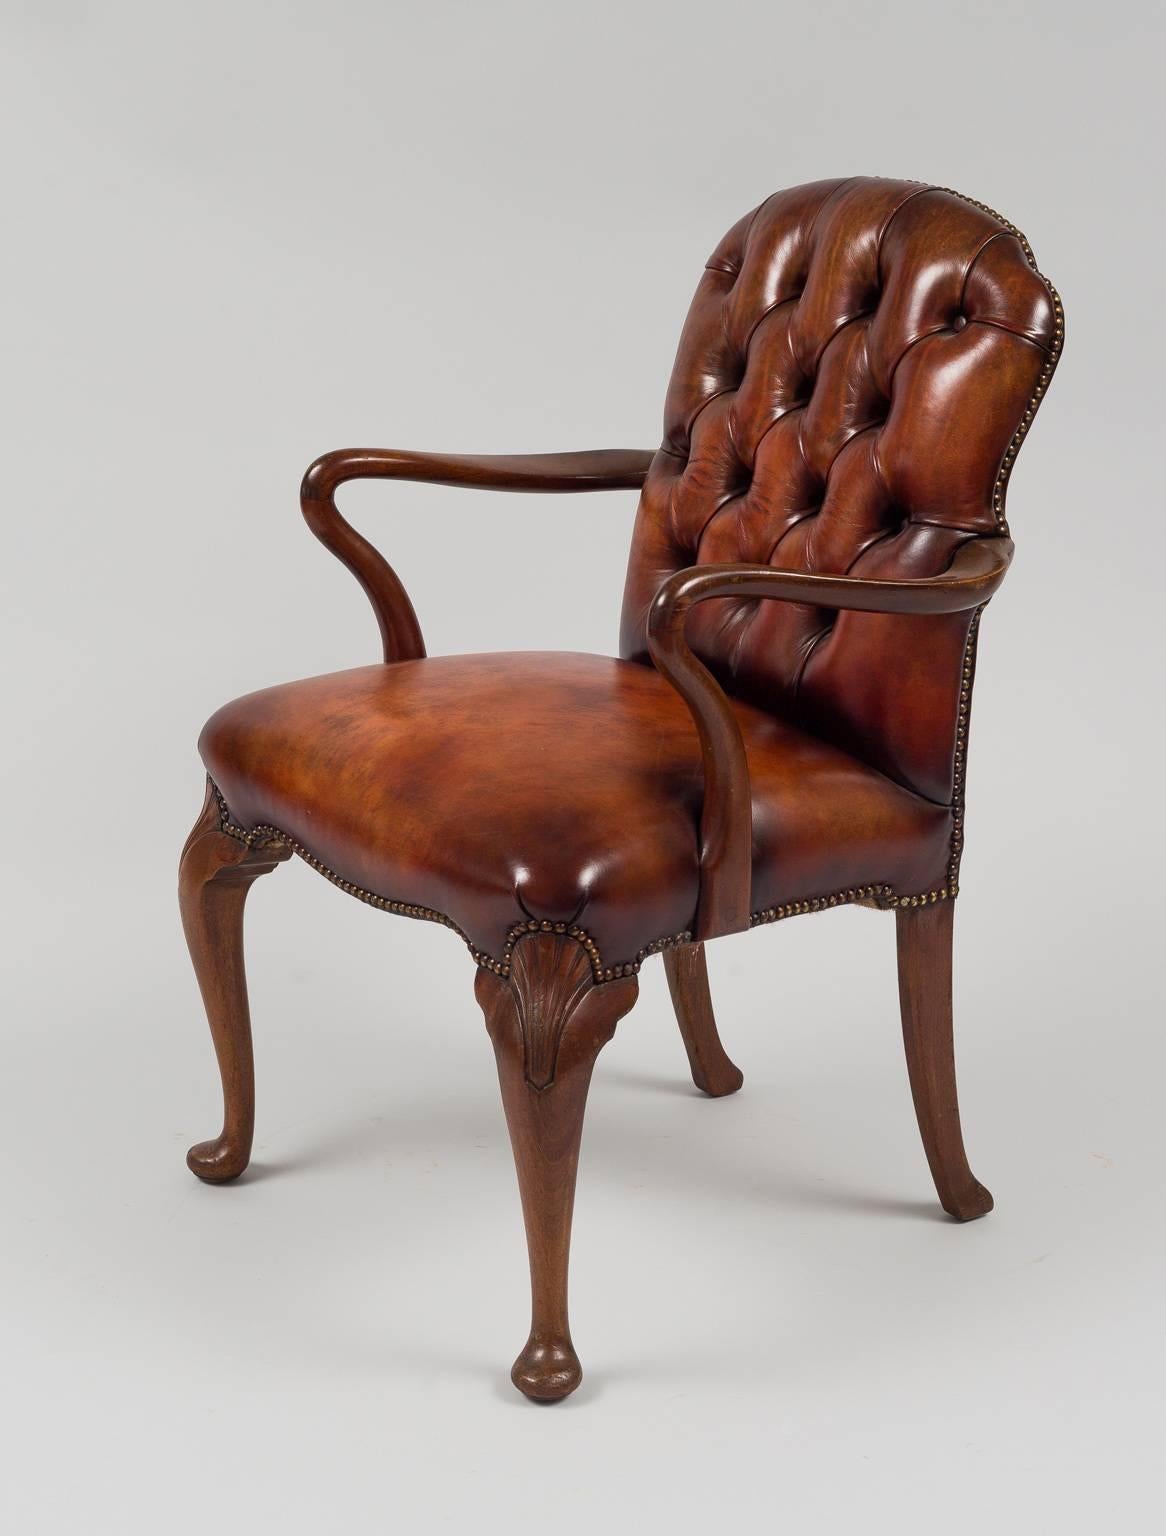 Mahogany frame with leather buttoned back and tight seat, cabriole legs with shell carving on knees ending in pad feet. Upholstered in cognac-colored leather with brass nailheads.